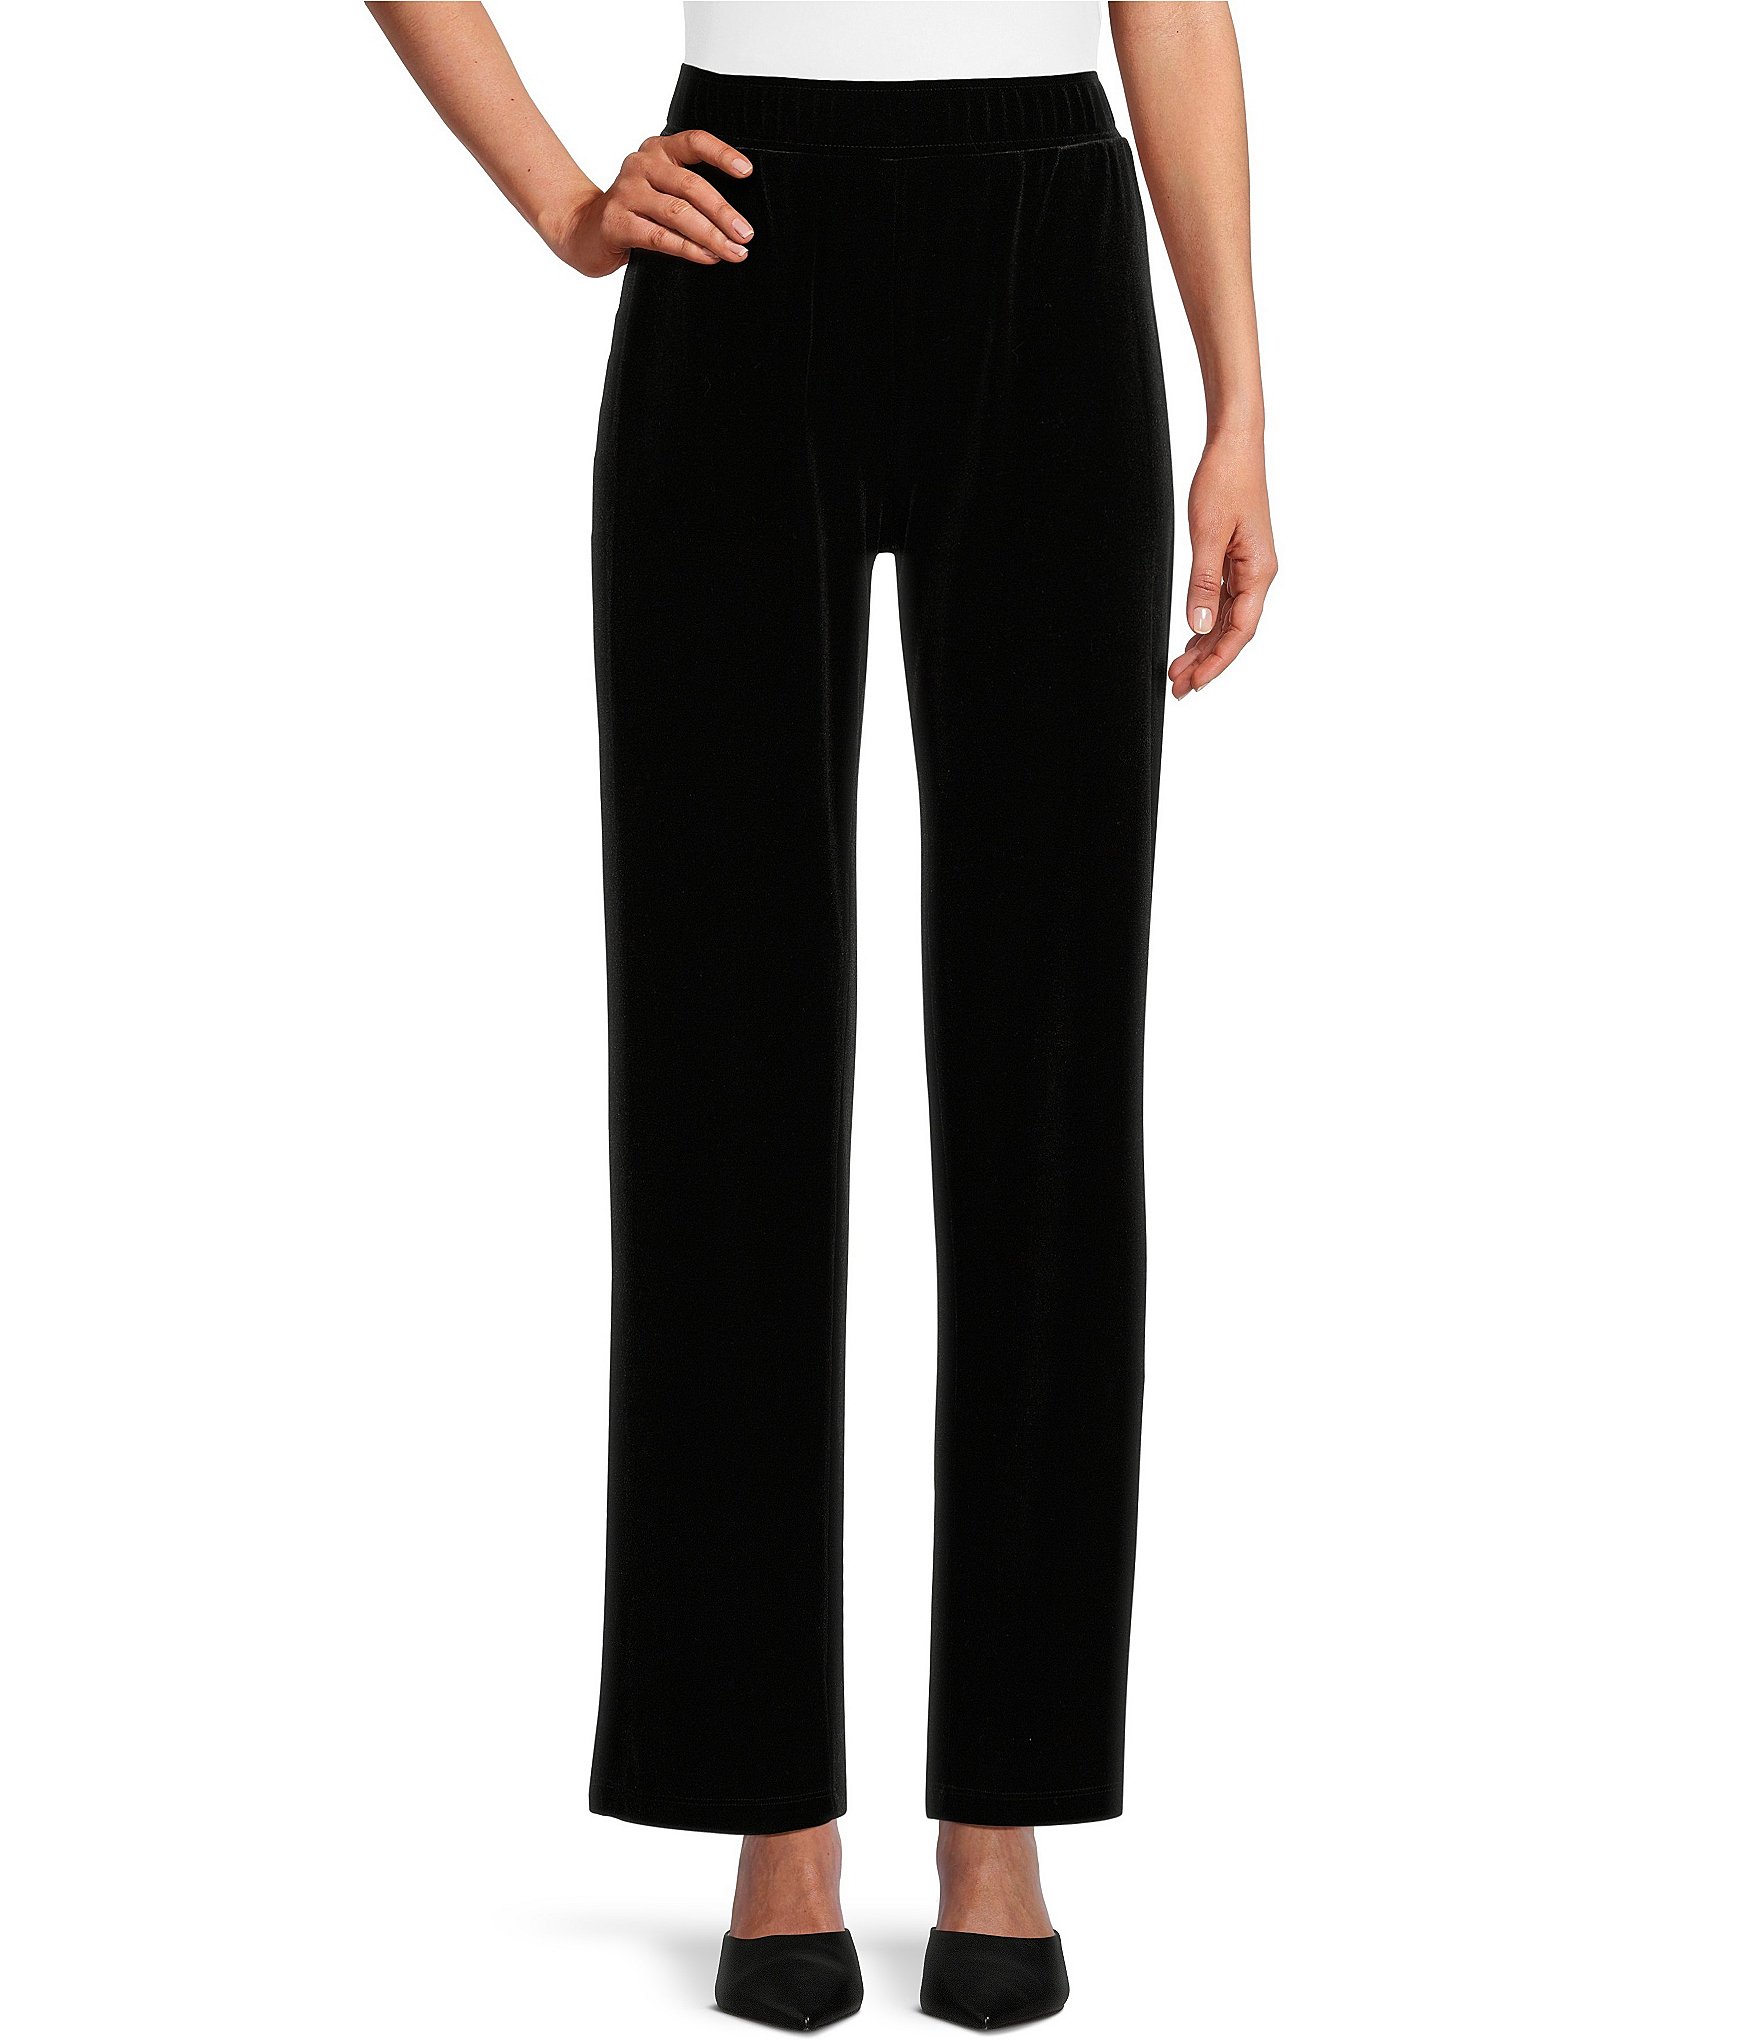 Intro Petite Size Bella Solid Double Knit Slim Her Straight Leg Pants